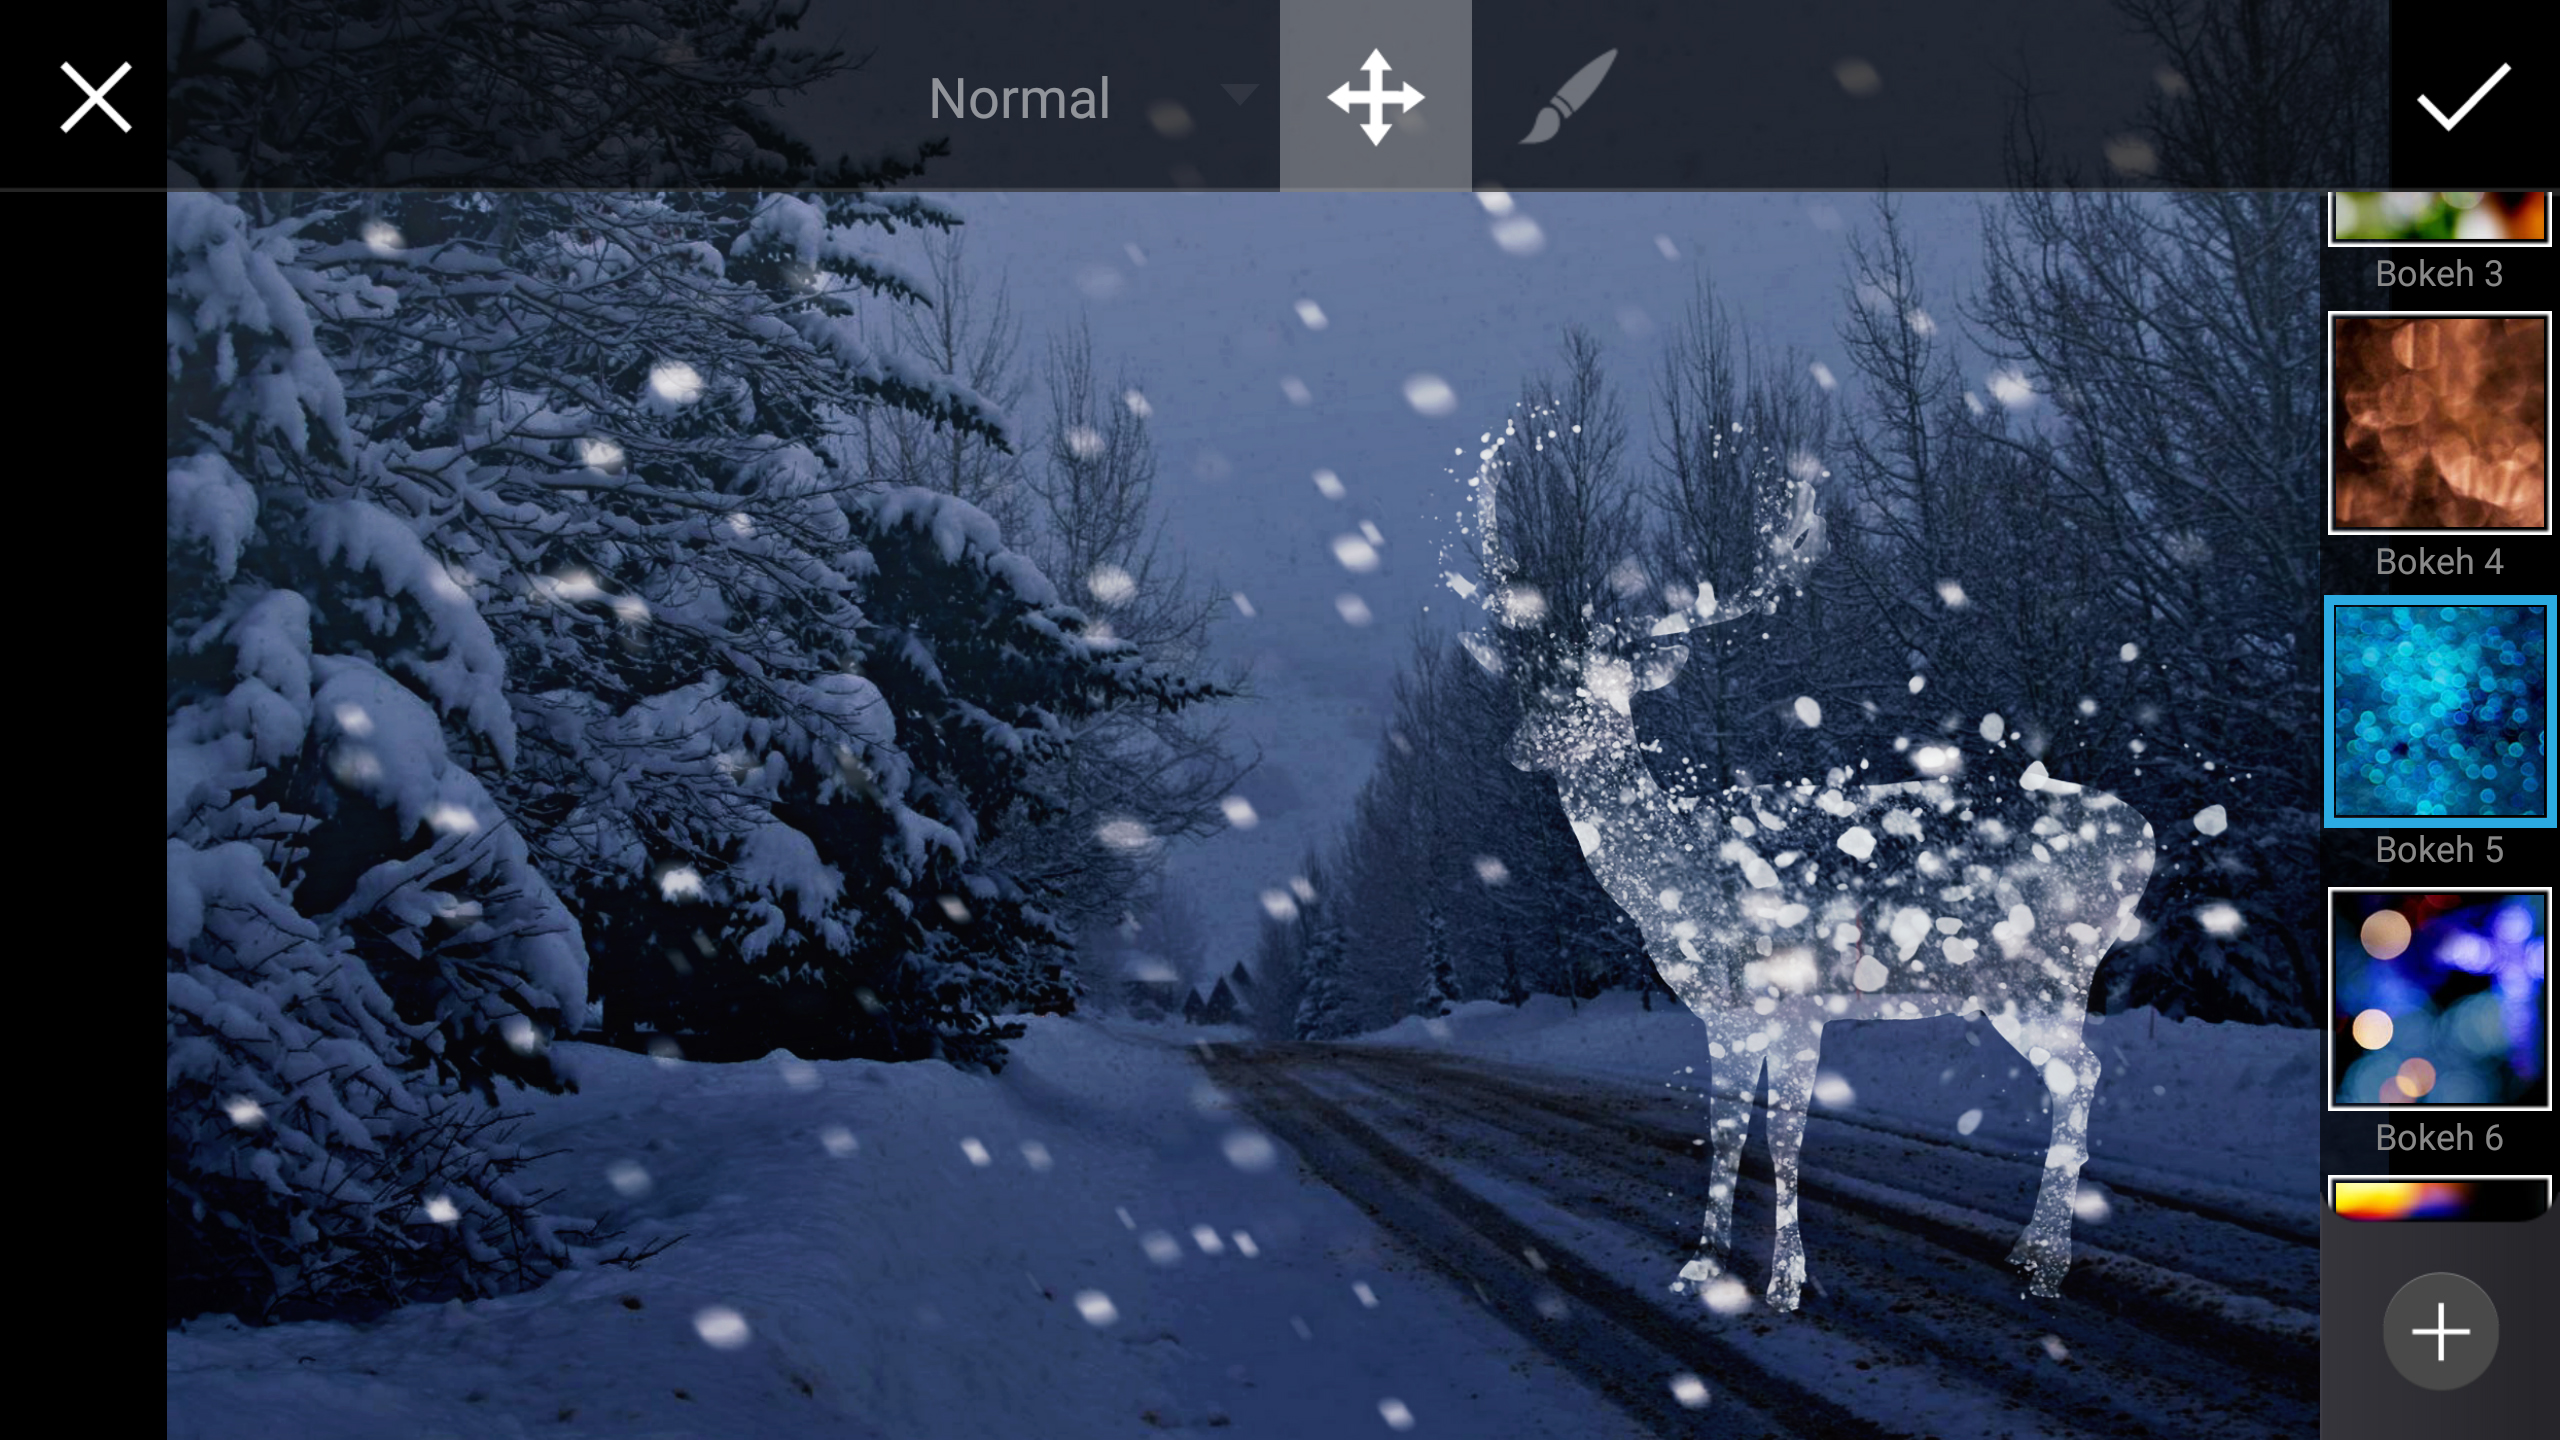 How to Create a Winter Wonderland With the Photo Editor - Picsart Blog